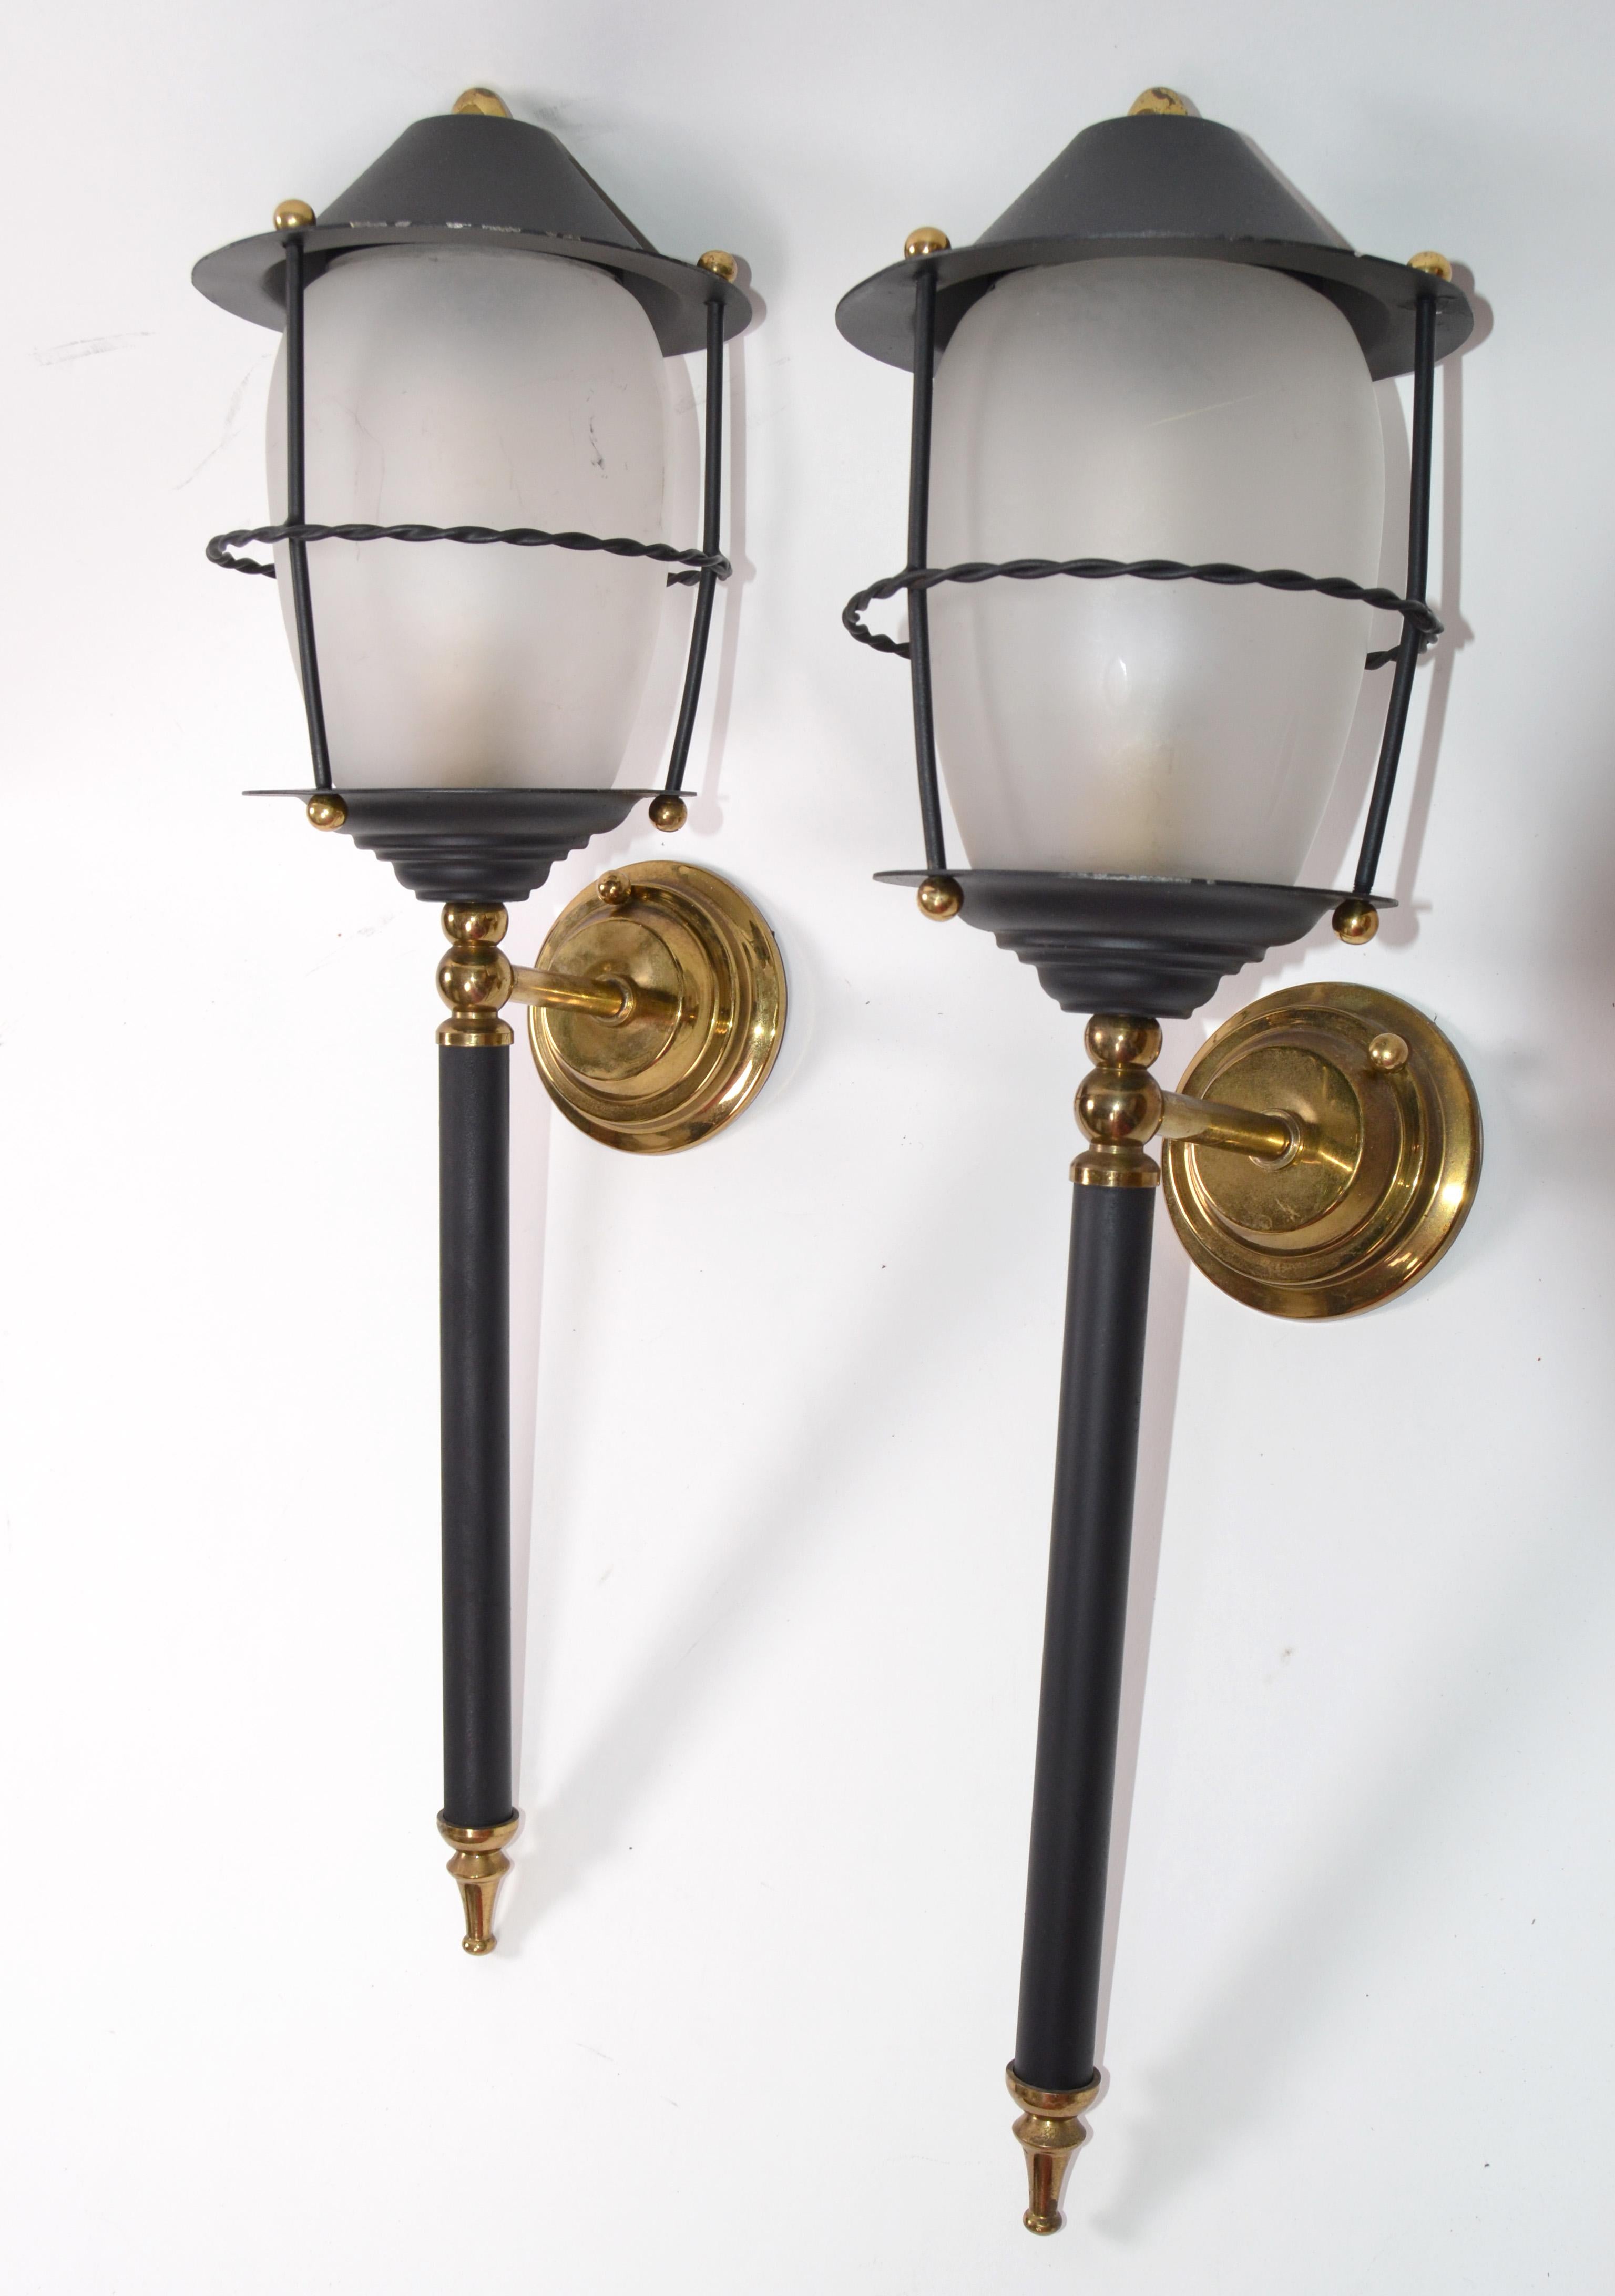 Original pair of French Maison Lunel Mid-Century Modern metal, glass and brass lantern, wall mounted sconces.
Back plate dimension is 3 inches in diameter.
  